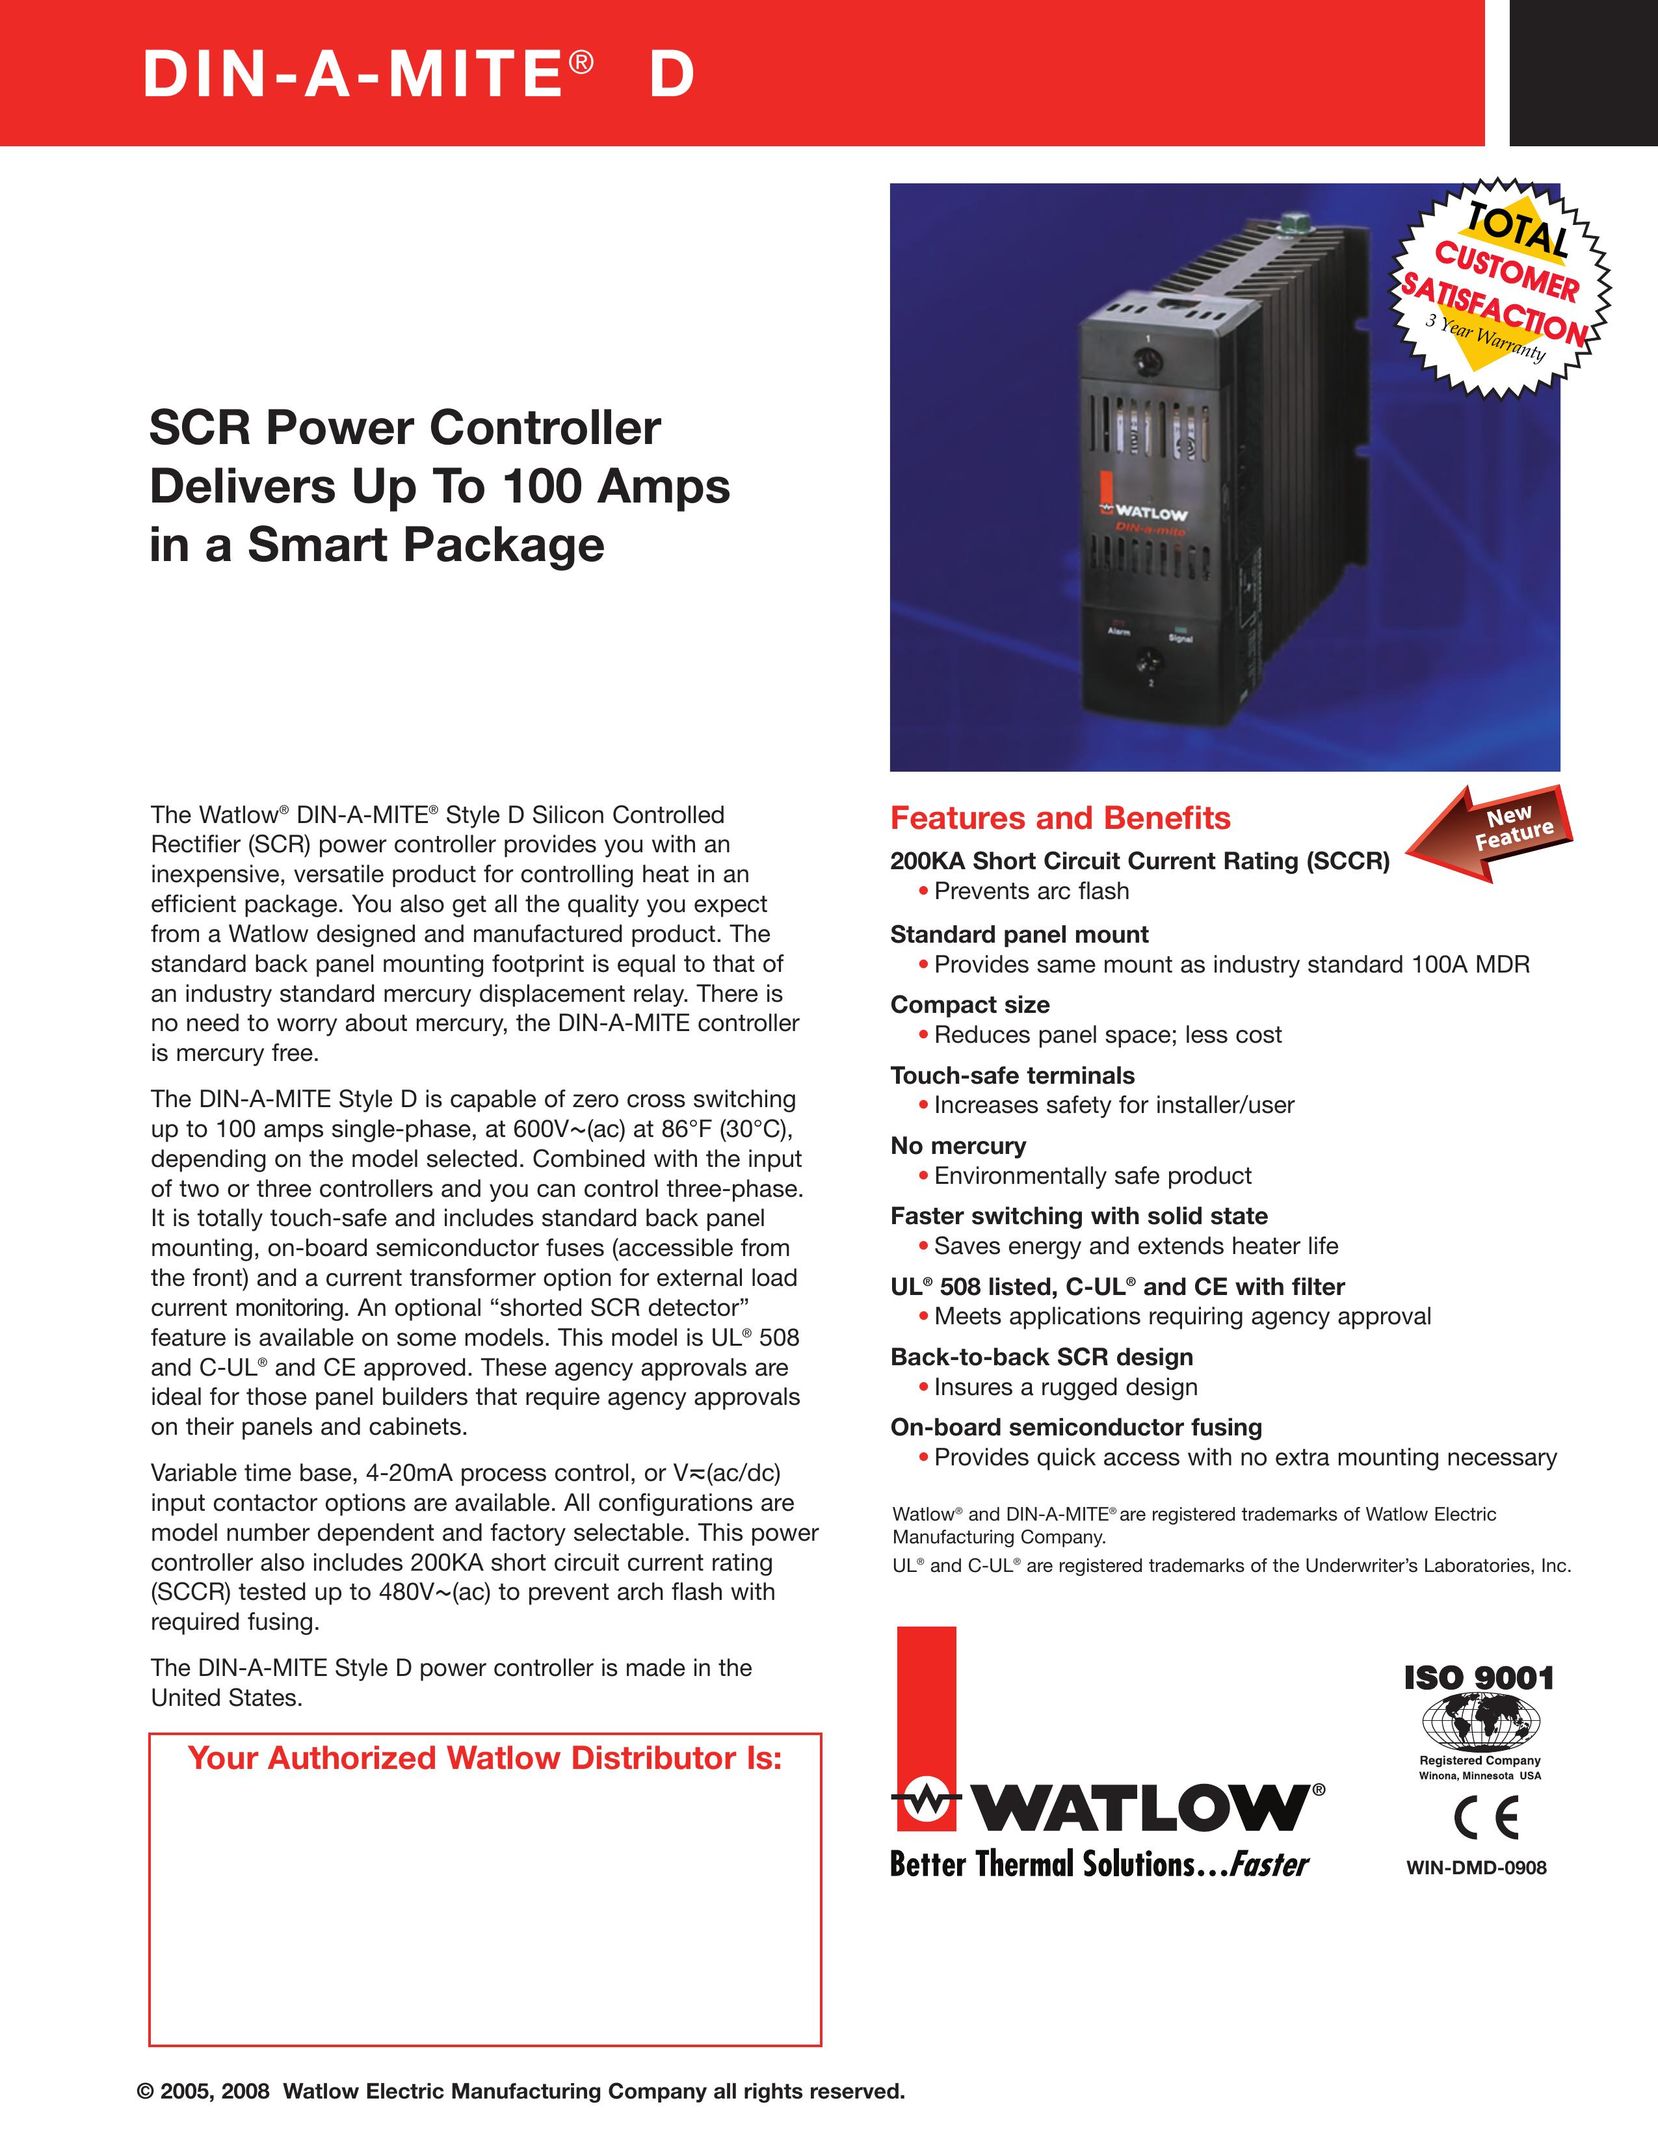 Watlow Electric SCR Power Controller Power Supply User Manual